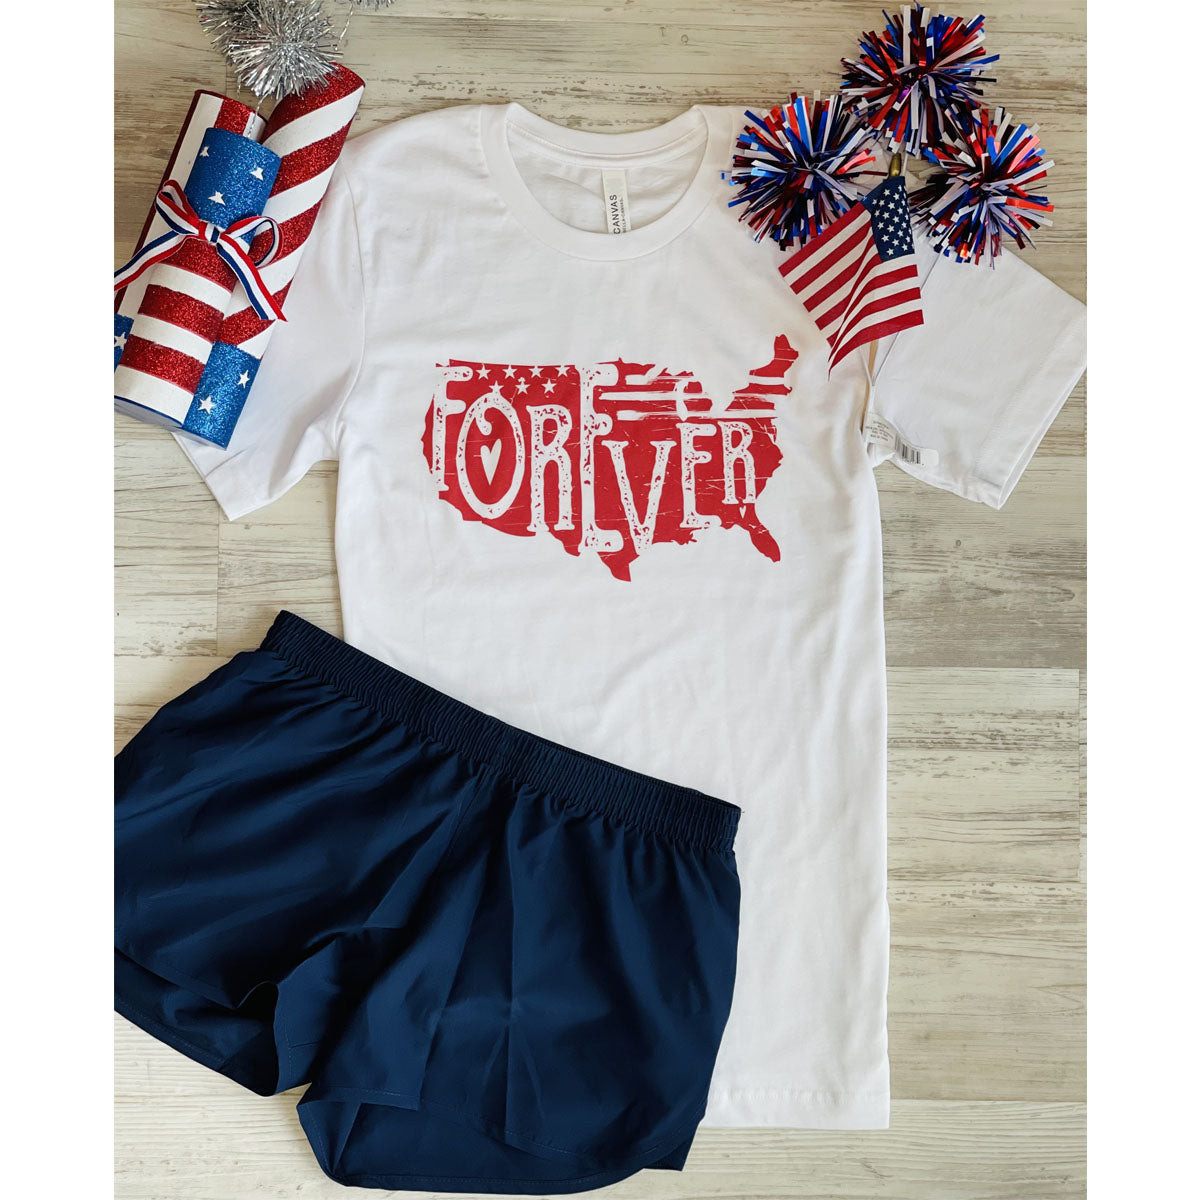 America Forever Set (White Tee/Navy Shorts) - Southern Grace Creations